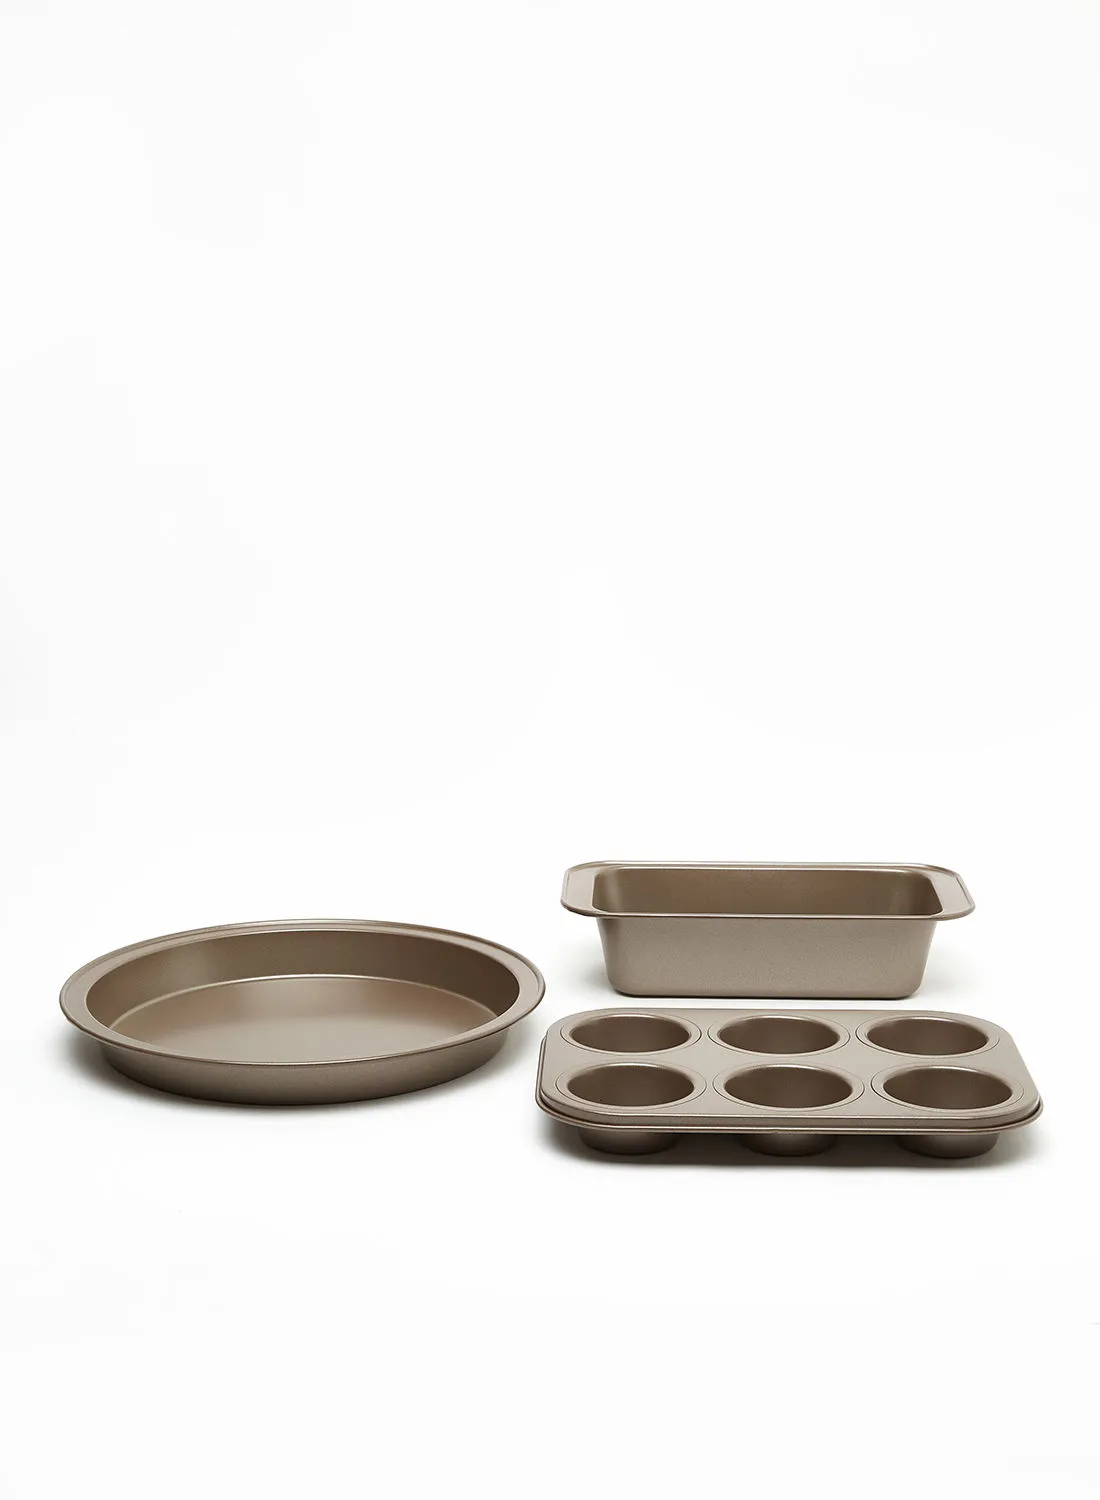 noon east 3 Piece Oven Pan Set - Made Of Carbon Steel - Baking Pan - Oven Trays - Cake Tray - Oven Pan - Cake Mold - Rose Gold